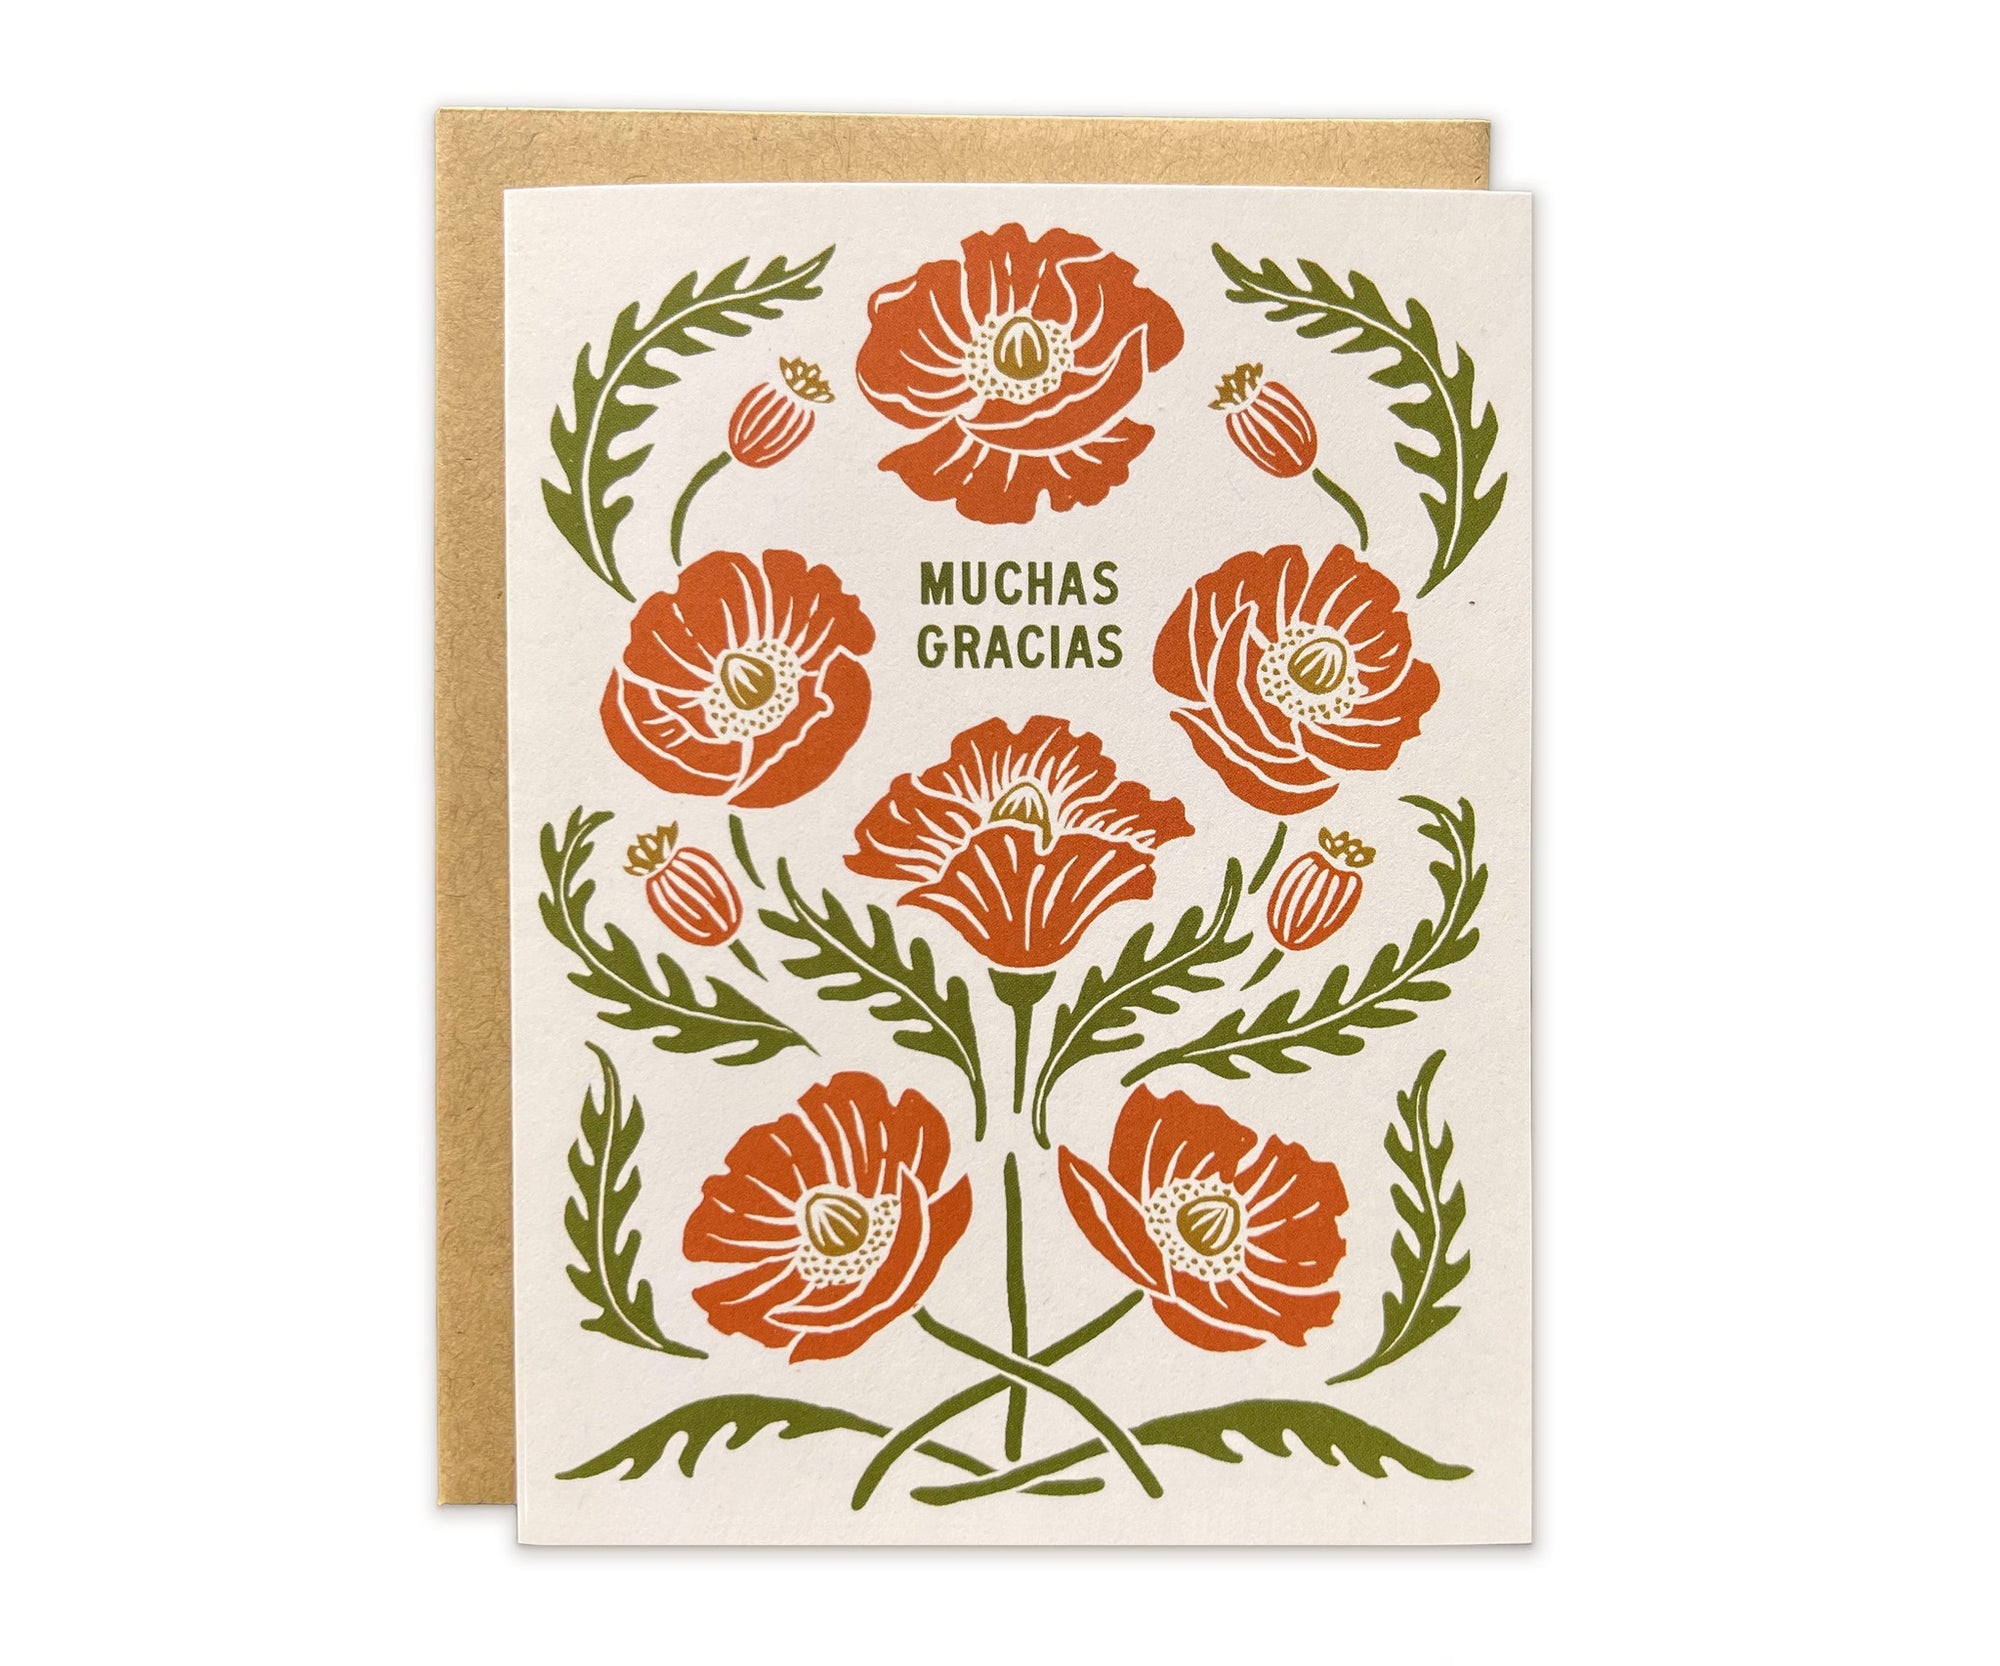 A Muchas Gracias Poppies Greeting Card by The Wild Wander with orange flowers.